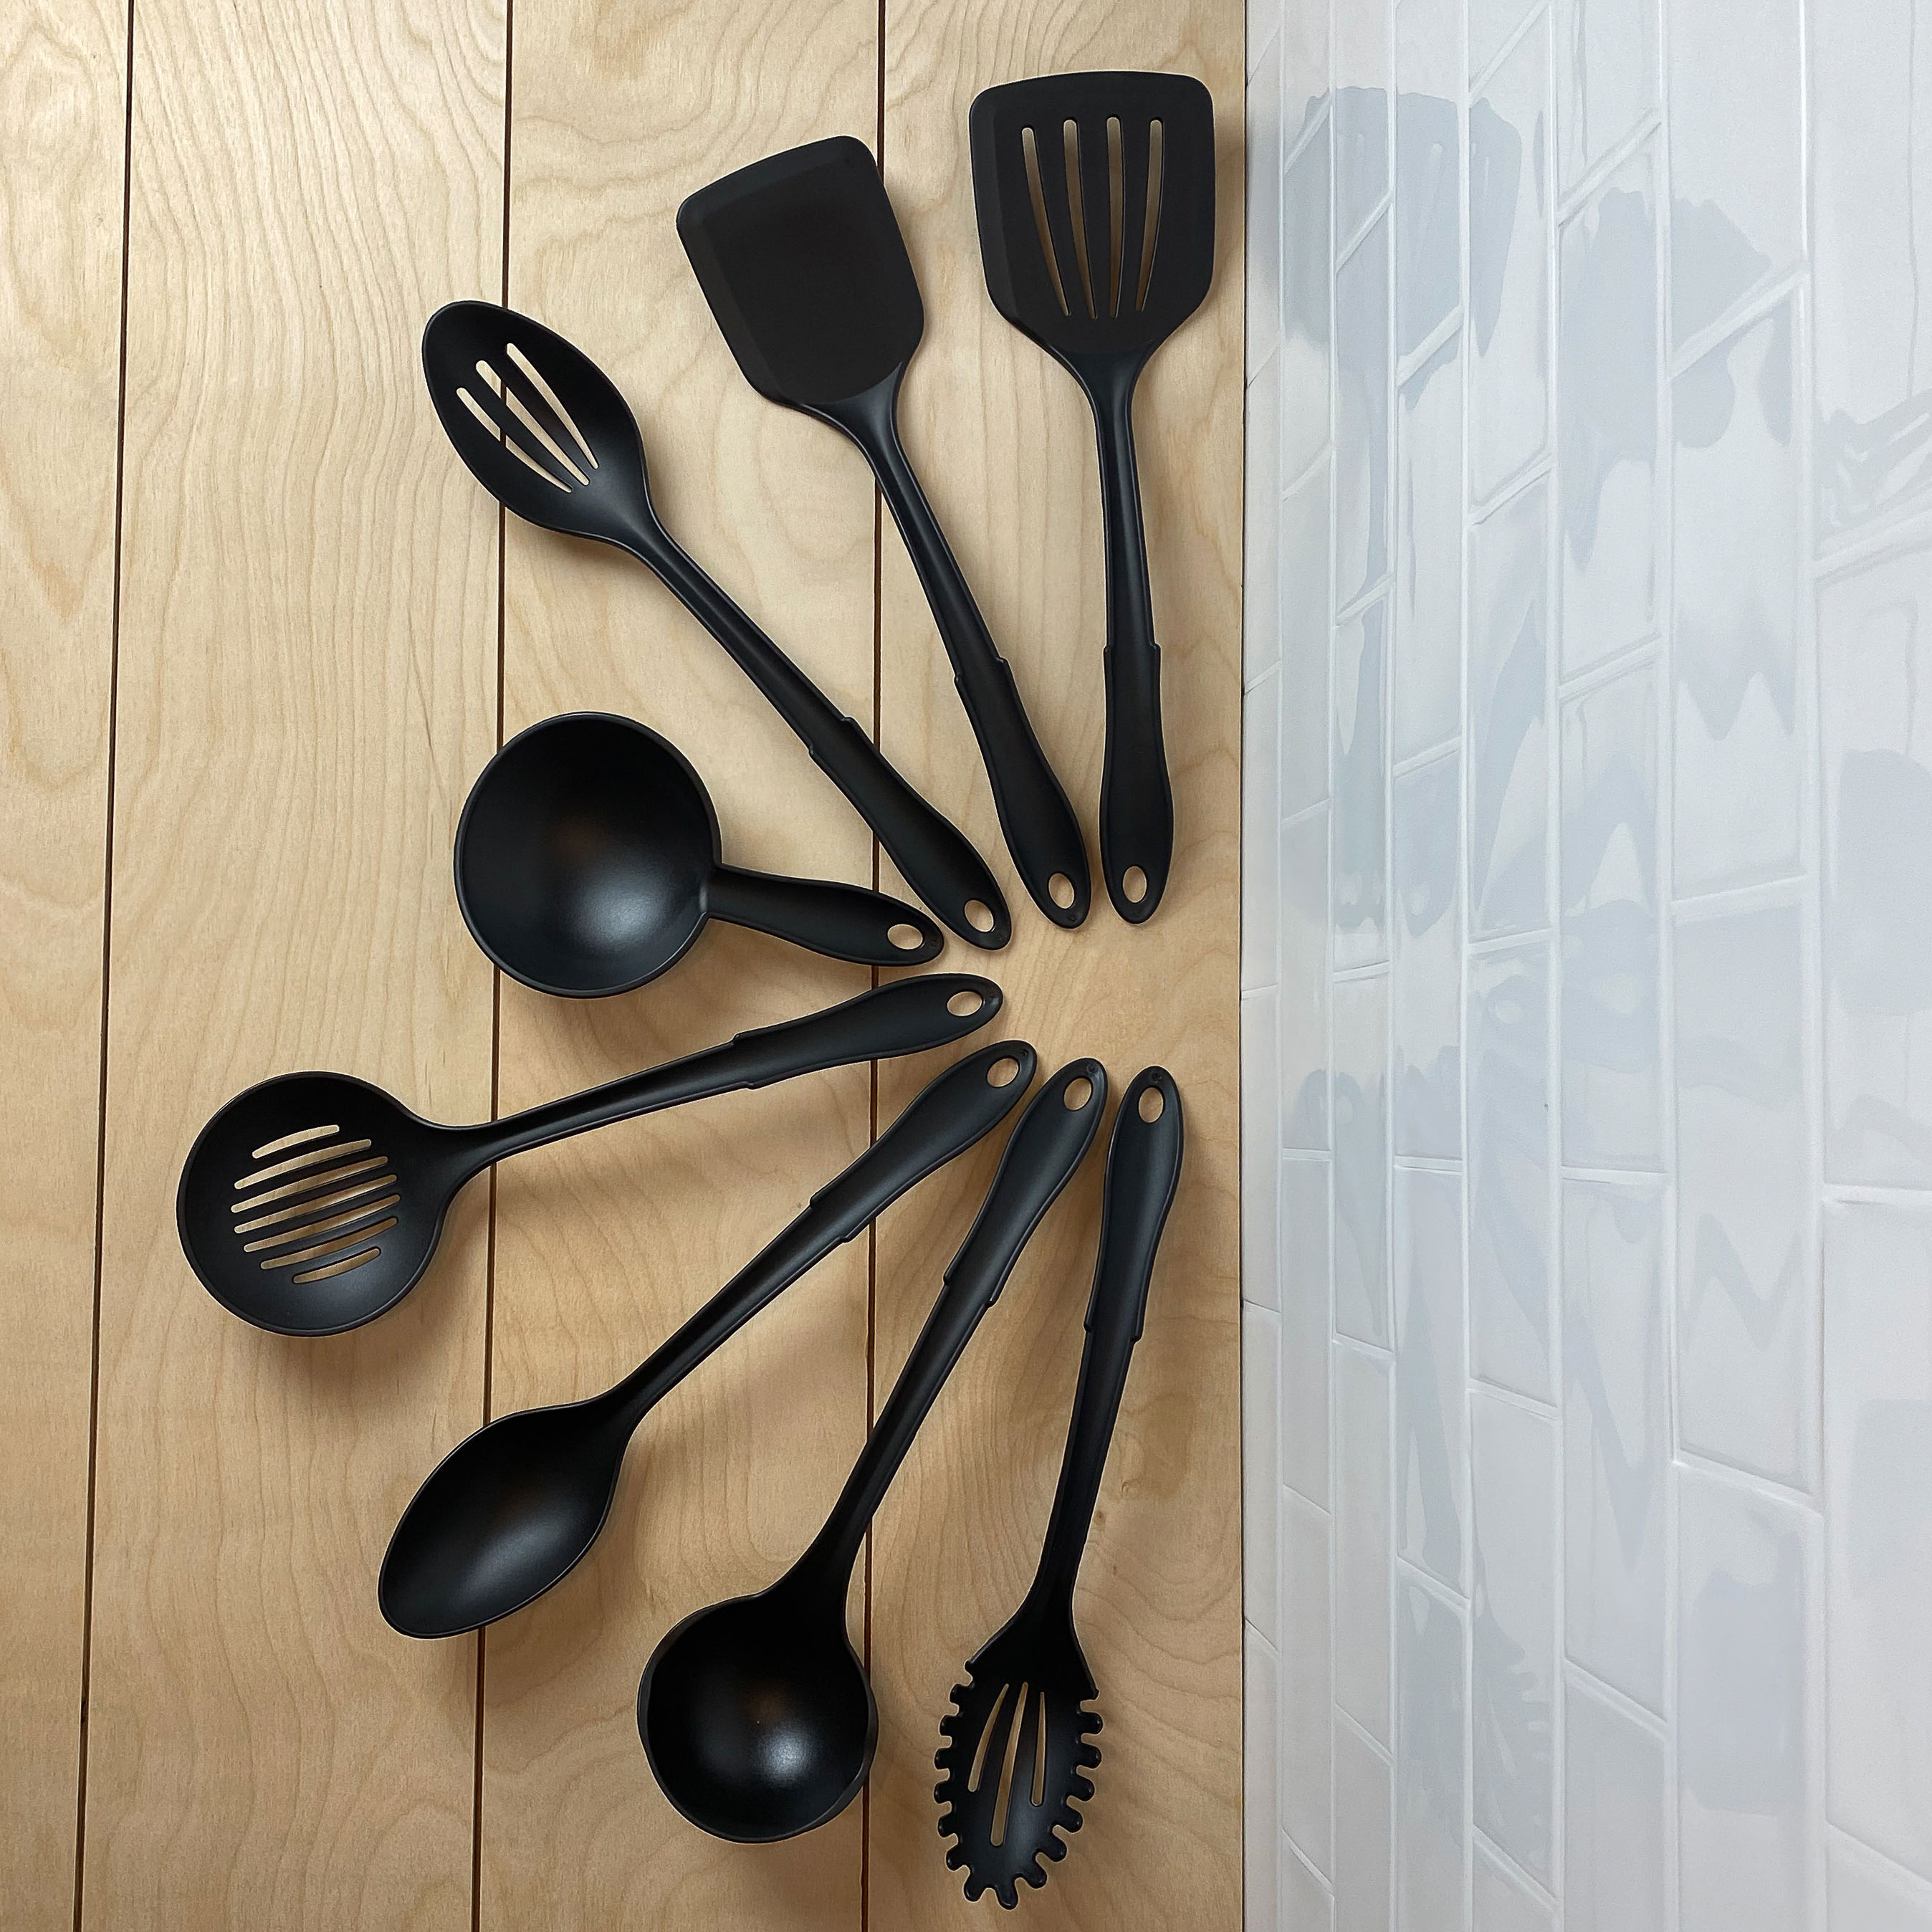 Mainstays 8-Piece Nylon Kitchen Utensil Set with Connector Ring, Black Plastic - image 3 of 20